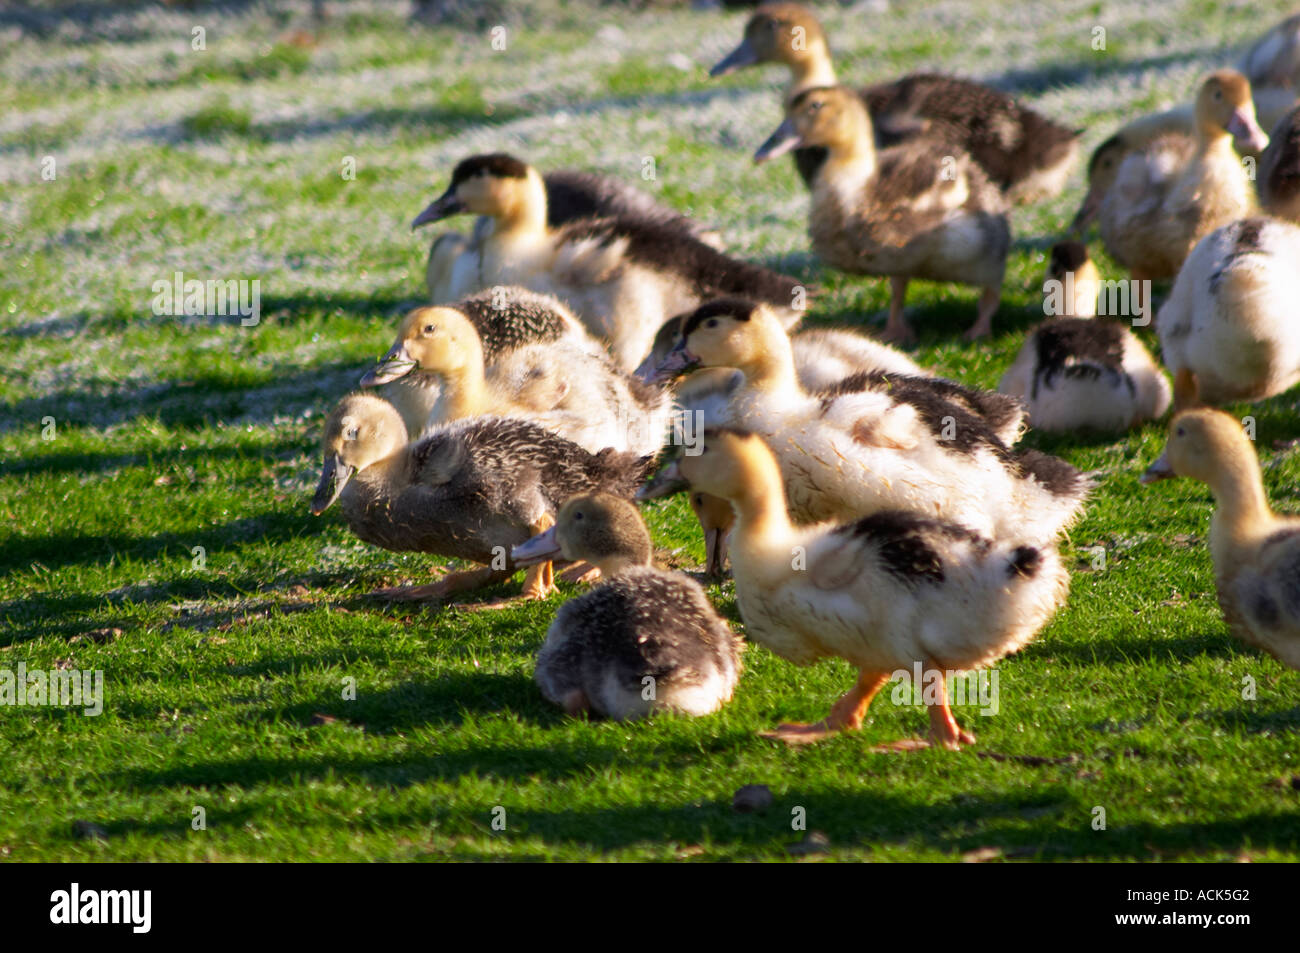 White and black ducks at a duck farm, kept outdoors for grazing before the final force feeding stage to make foie gras duck's liver. Ferme de Biorne duck and fowl farm Dordogne France Stock Photo